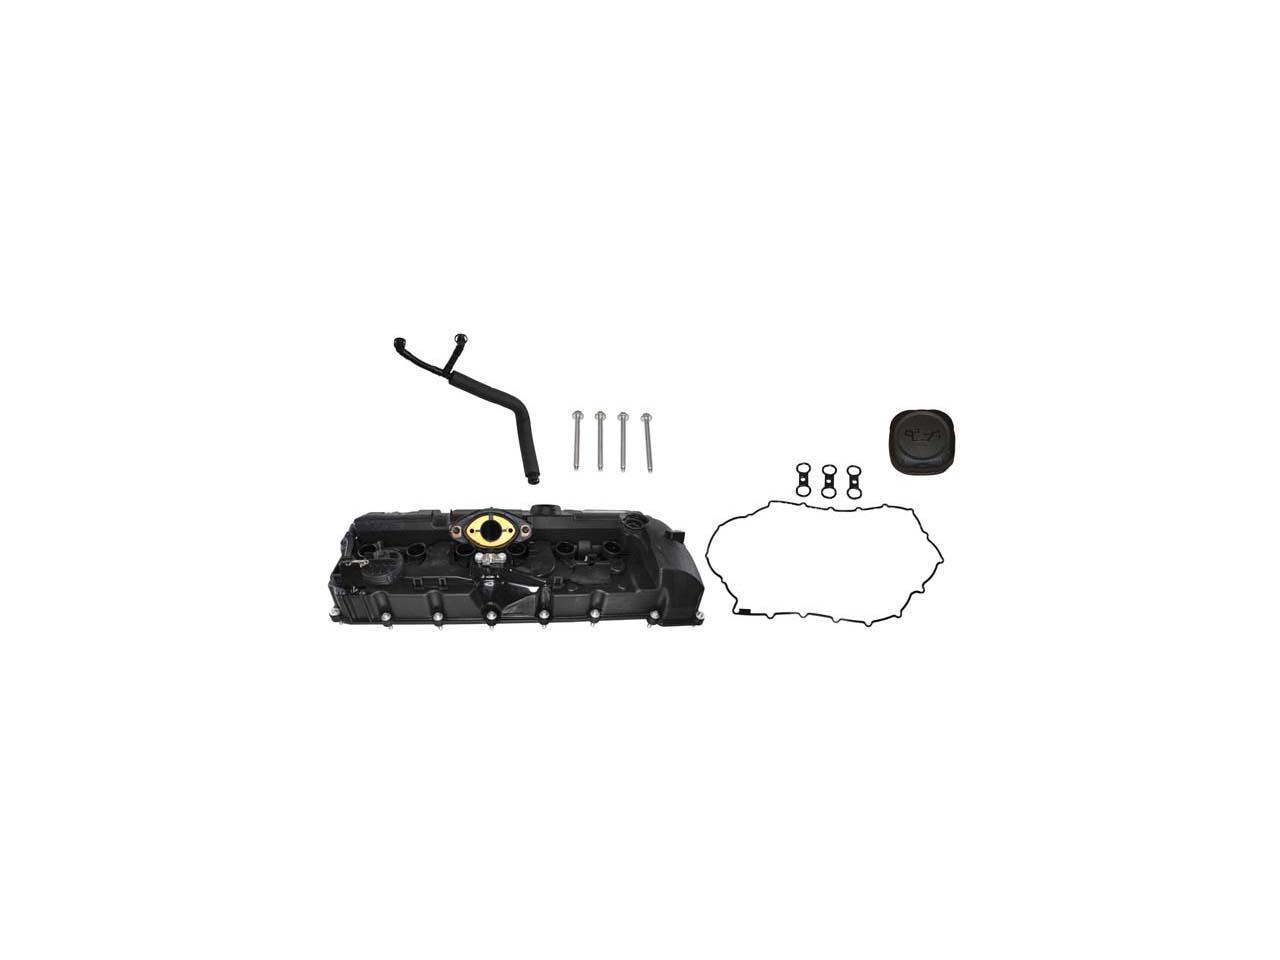 with Gasket Hoses Oil Cap Rein VCK0102B OE Replacement Valve Cover Kit for Select BMW Vehicles and Hardware